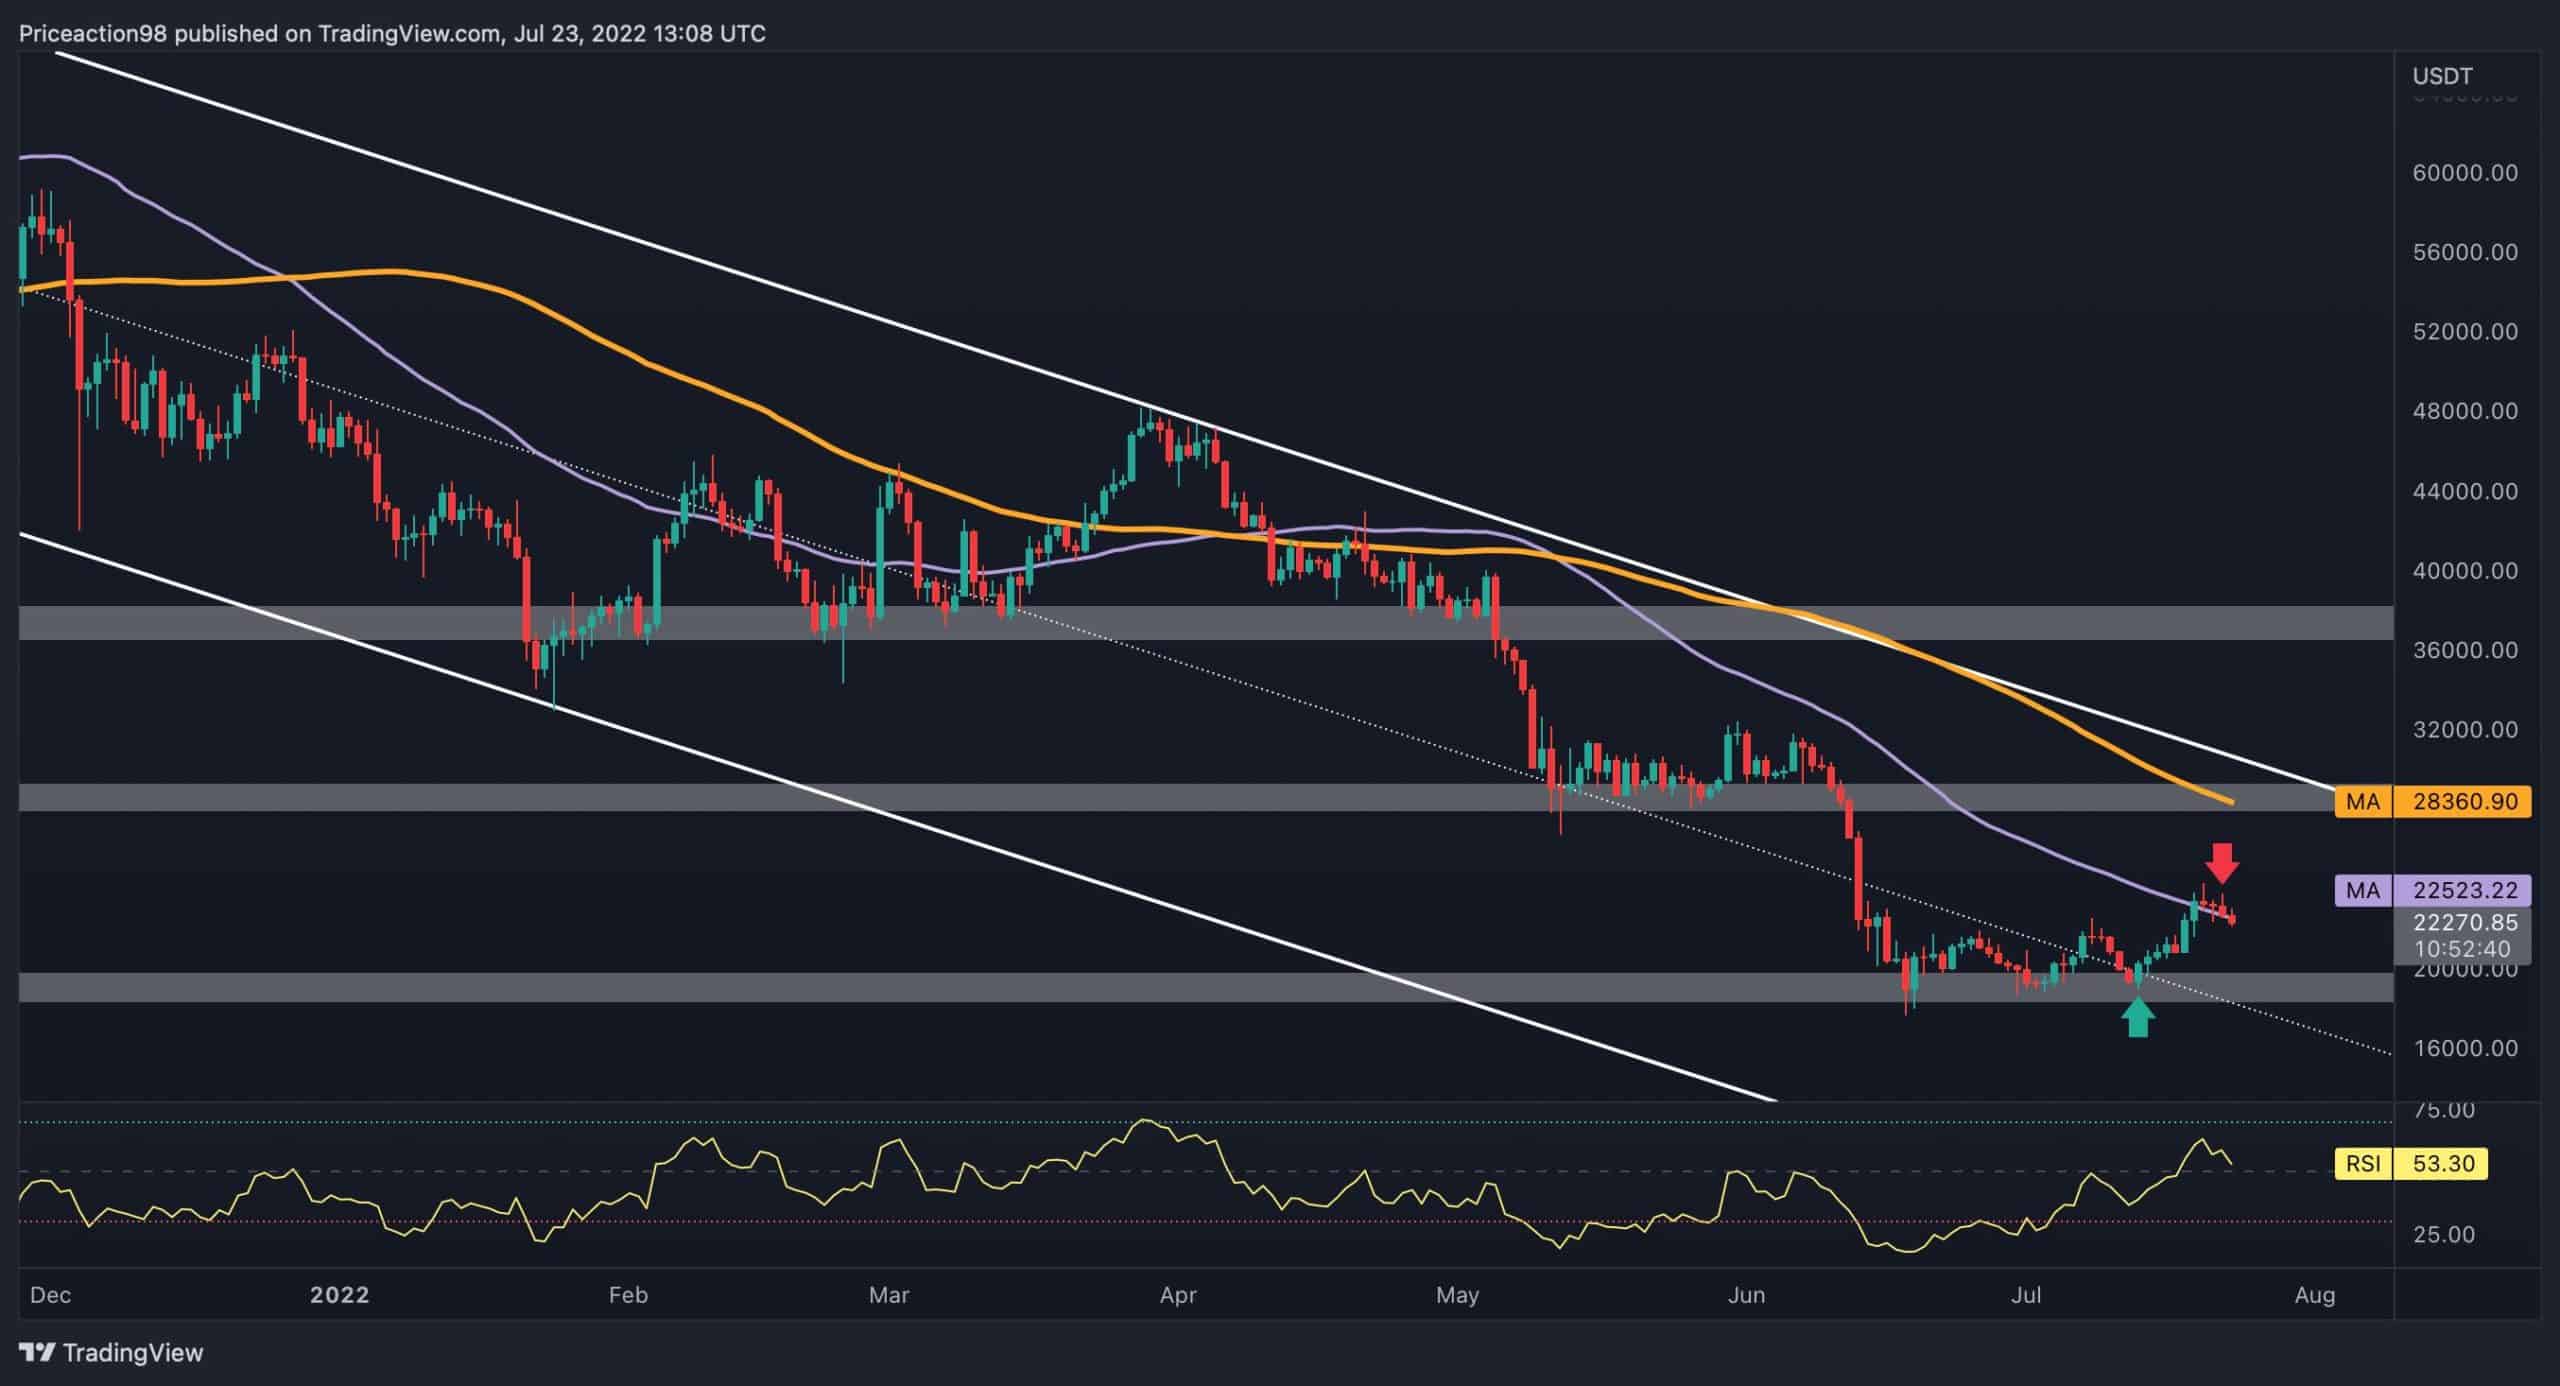 Bitcoin Corrects Towards K But How Low Can it Go?  (Bitcoin Price Analysis)